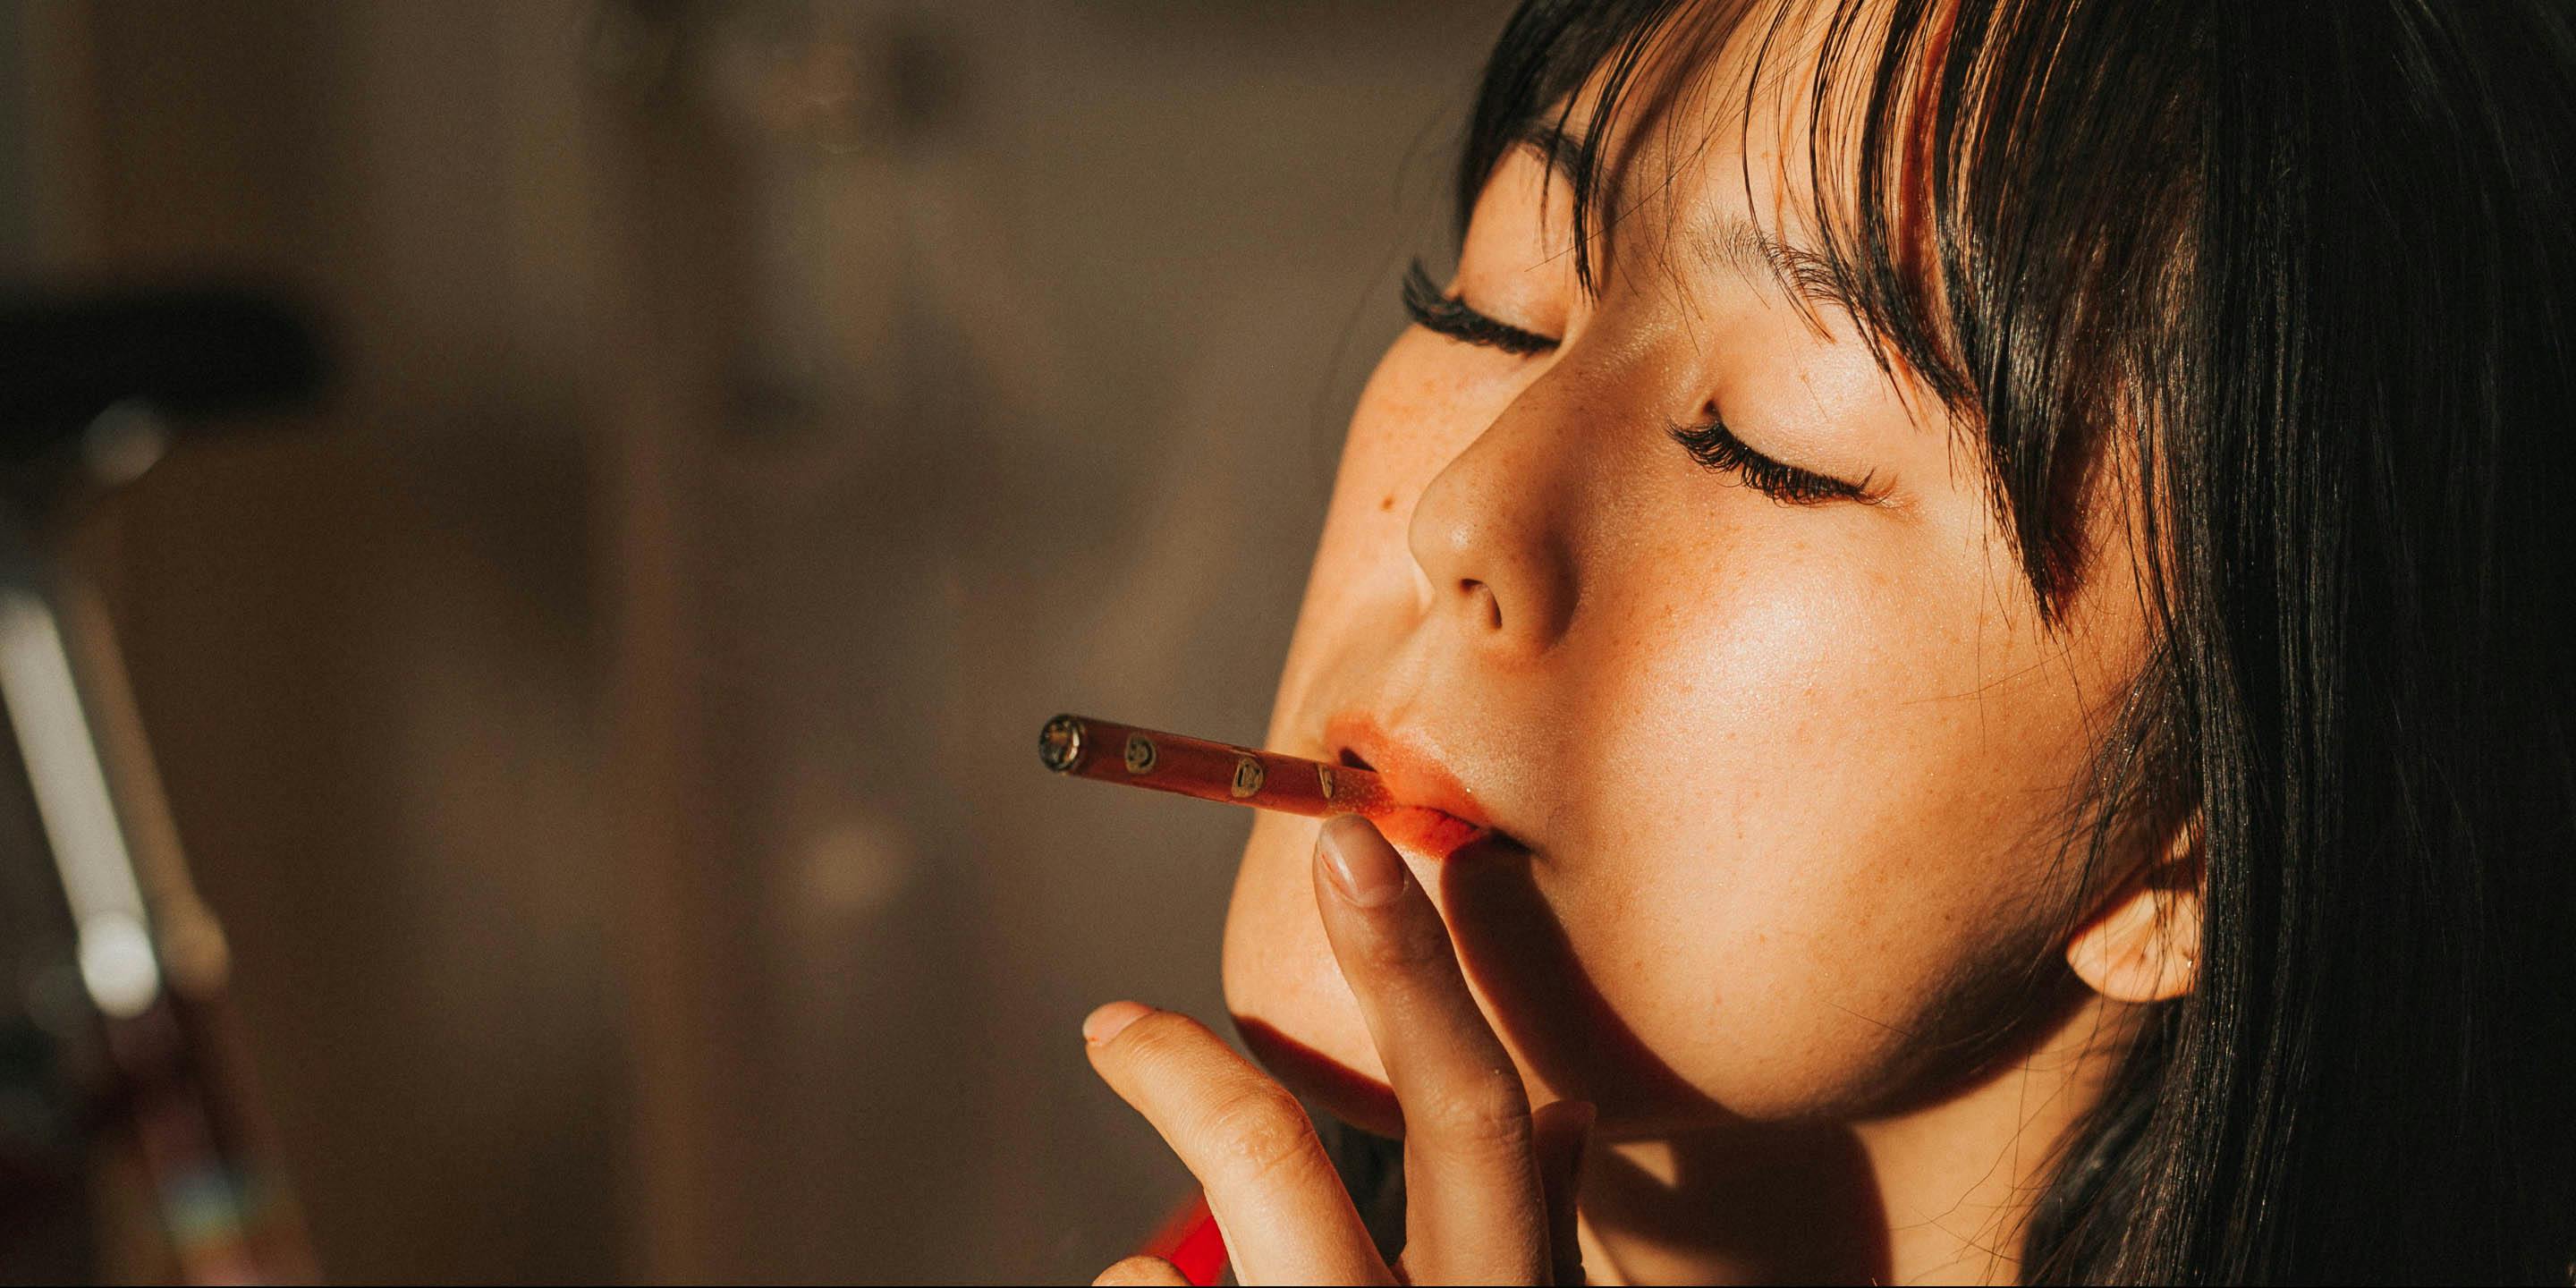 A woman smokes with her eyes closed. A woman smokes while sitting down. A new study cites that problematic behavior was not shown to increase in tandem with legalized cannabis laws.